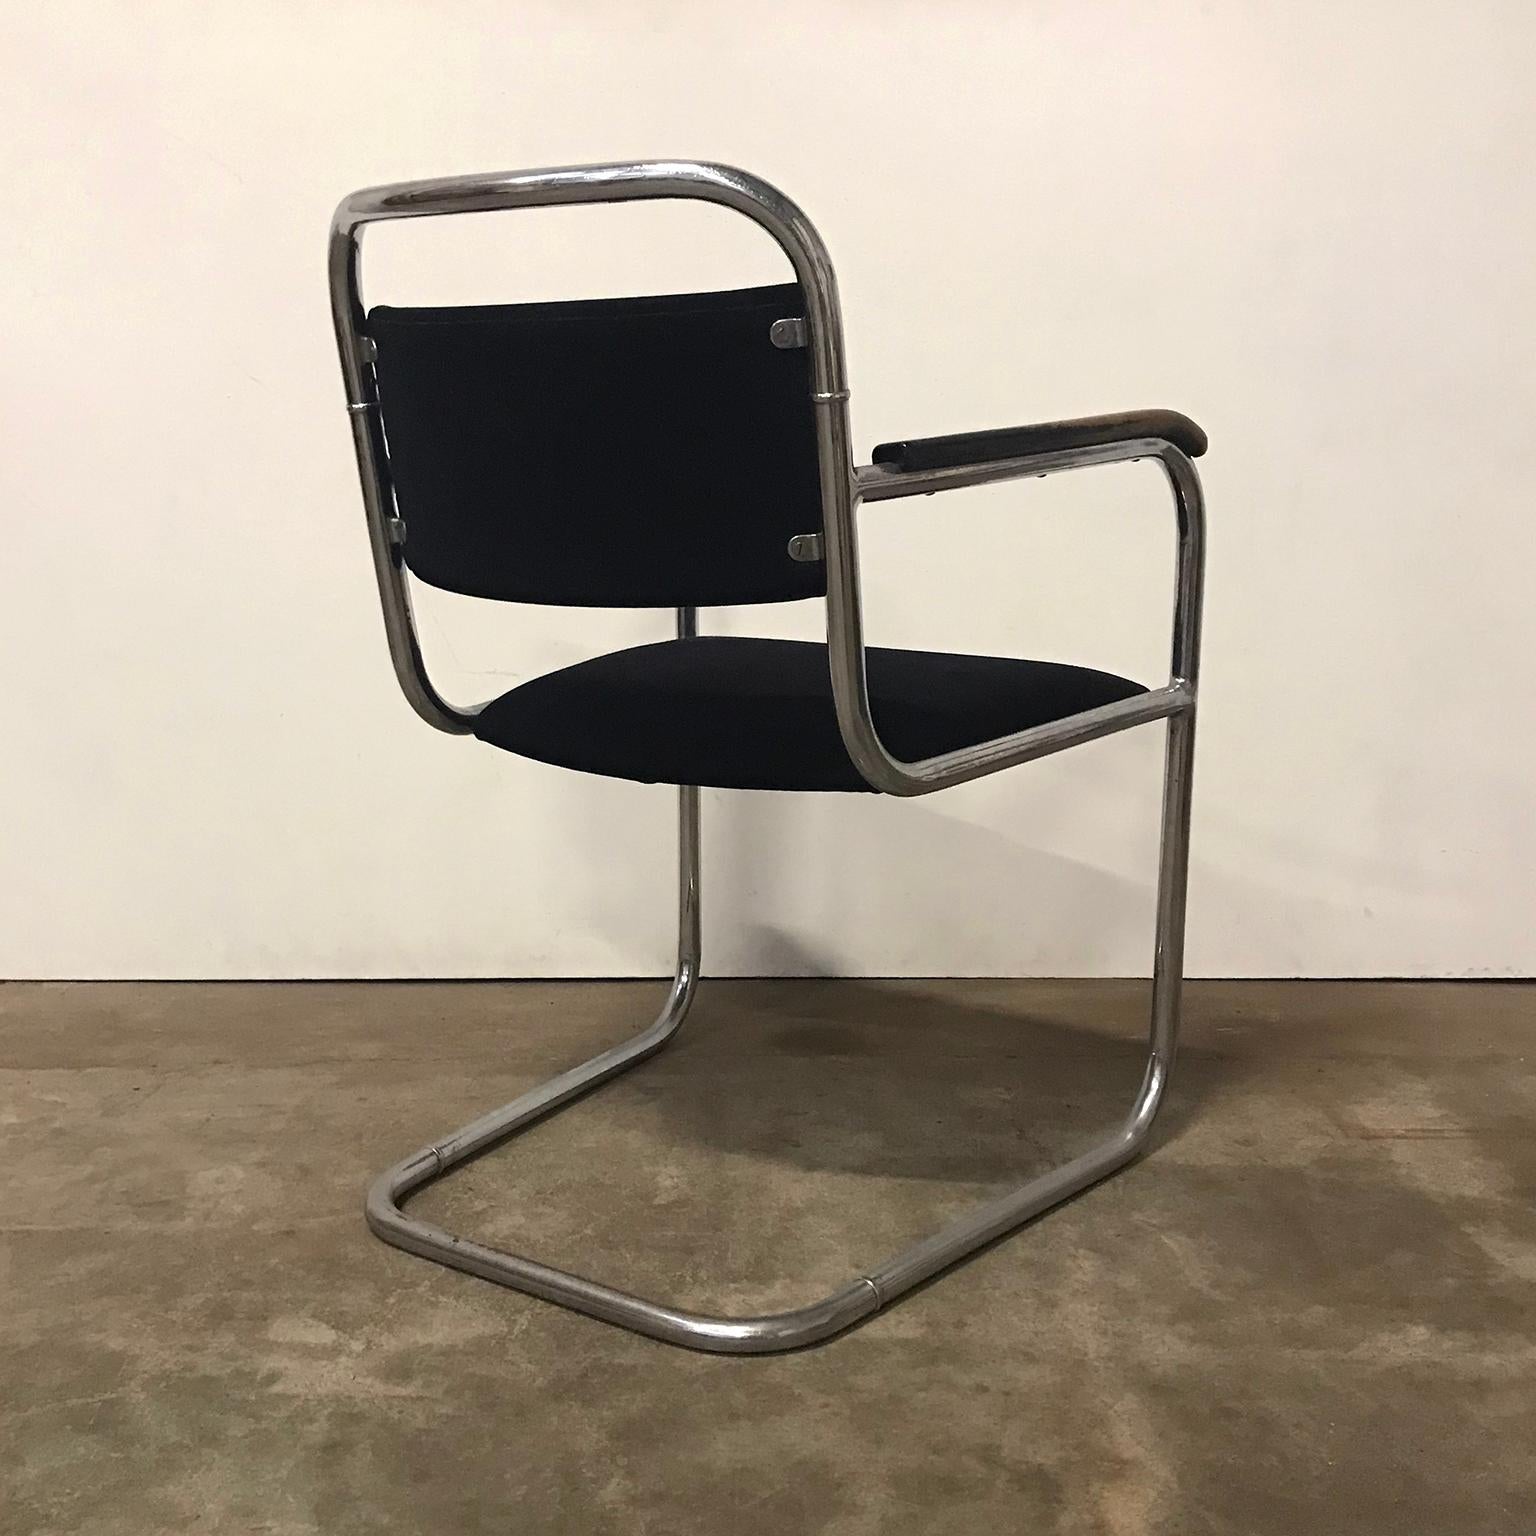 Dutch Design, Set of Original Tubular Chairs with Black Upholstery, circa 1930 In Good Condition For Sale In Amsterdam IJMuiden, NL